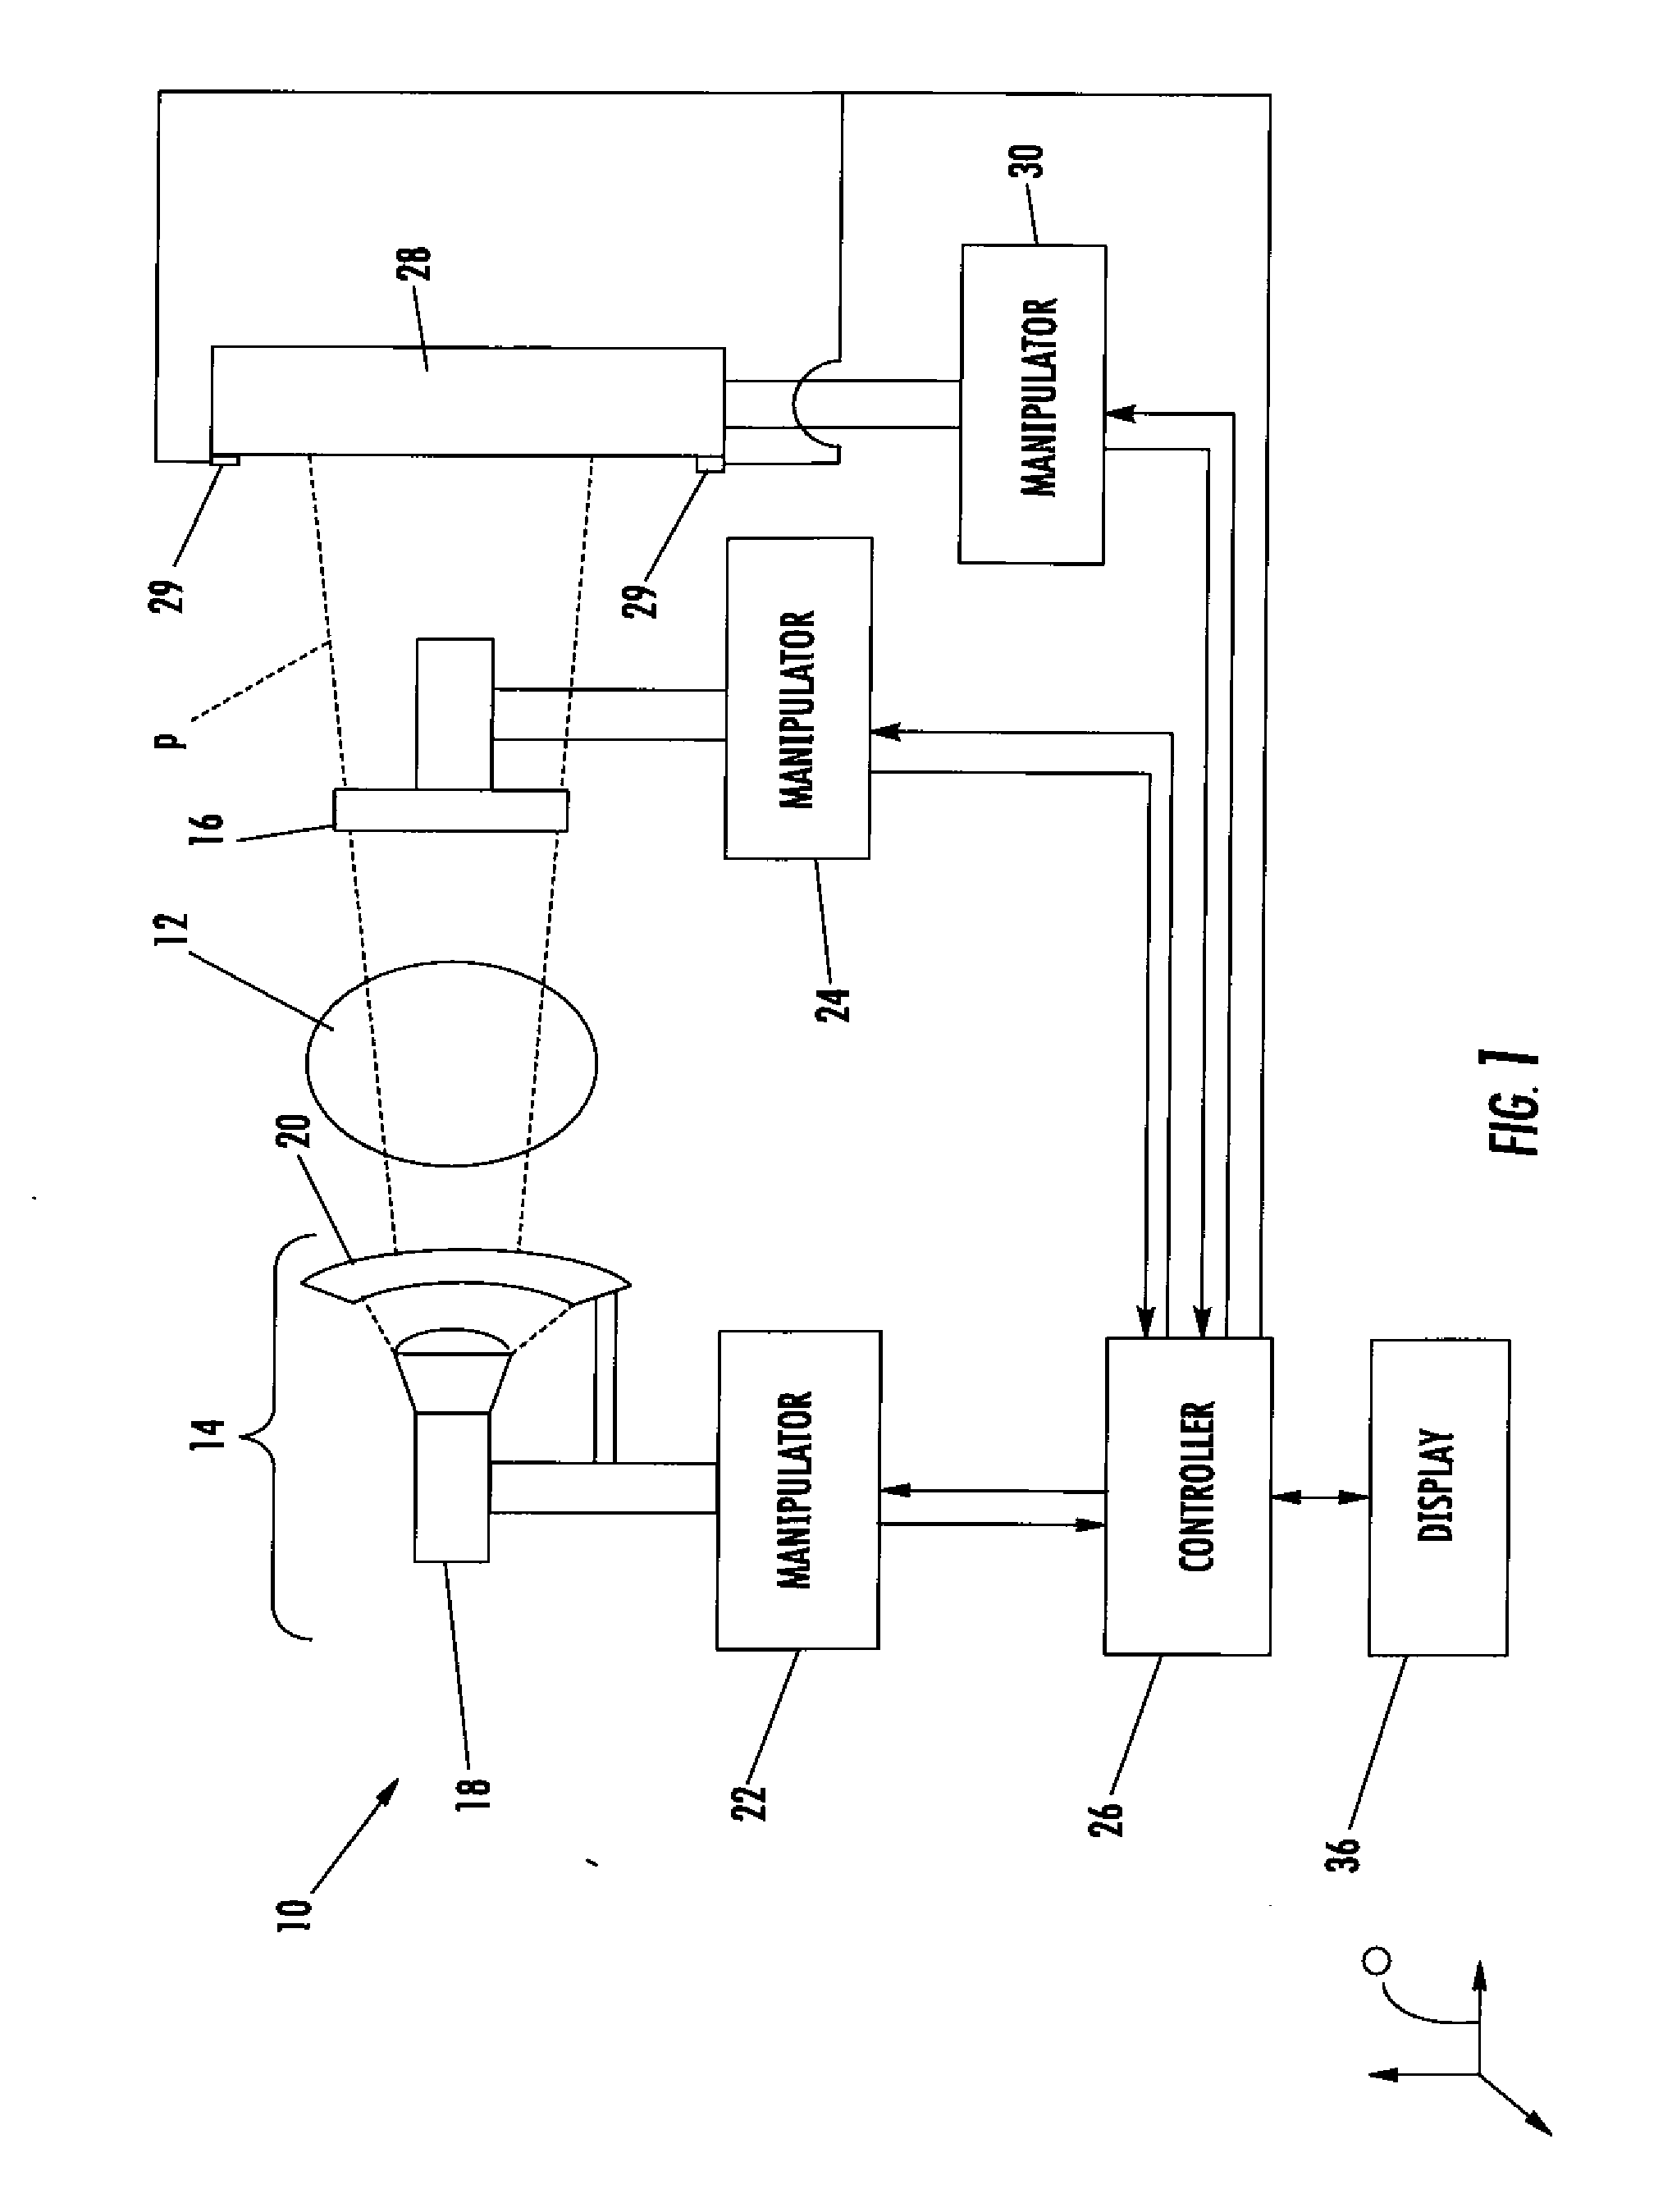 Method for aligning radiographic inspection system